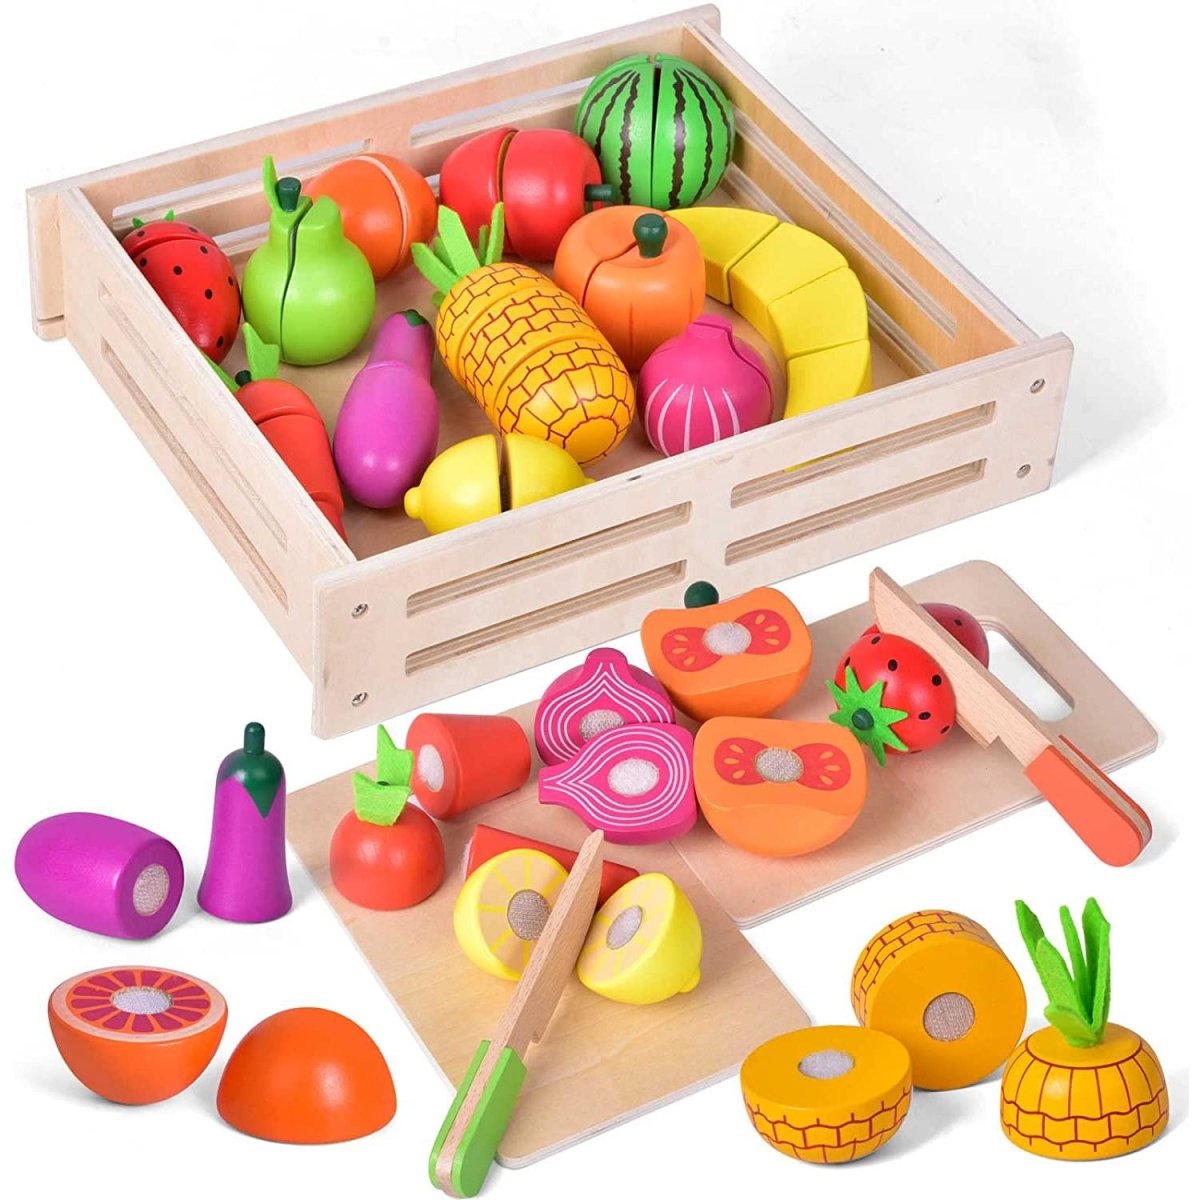 Wooden Play Food for Kids ｜Pretend Play